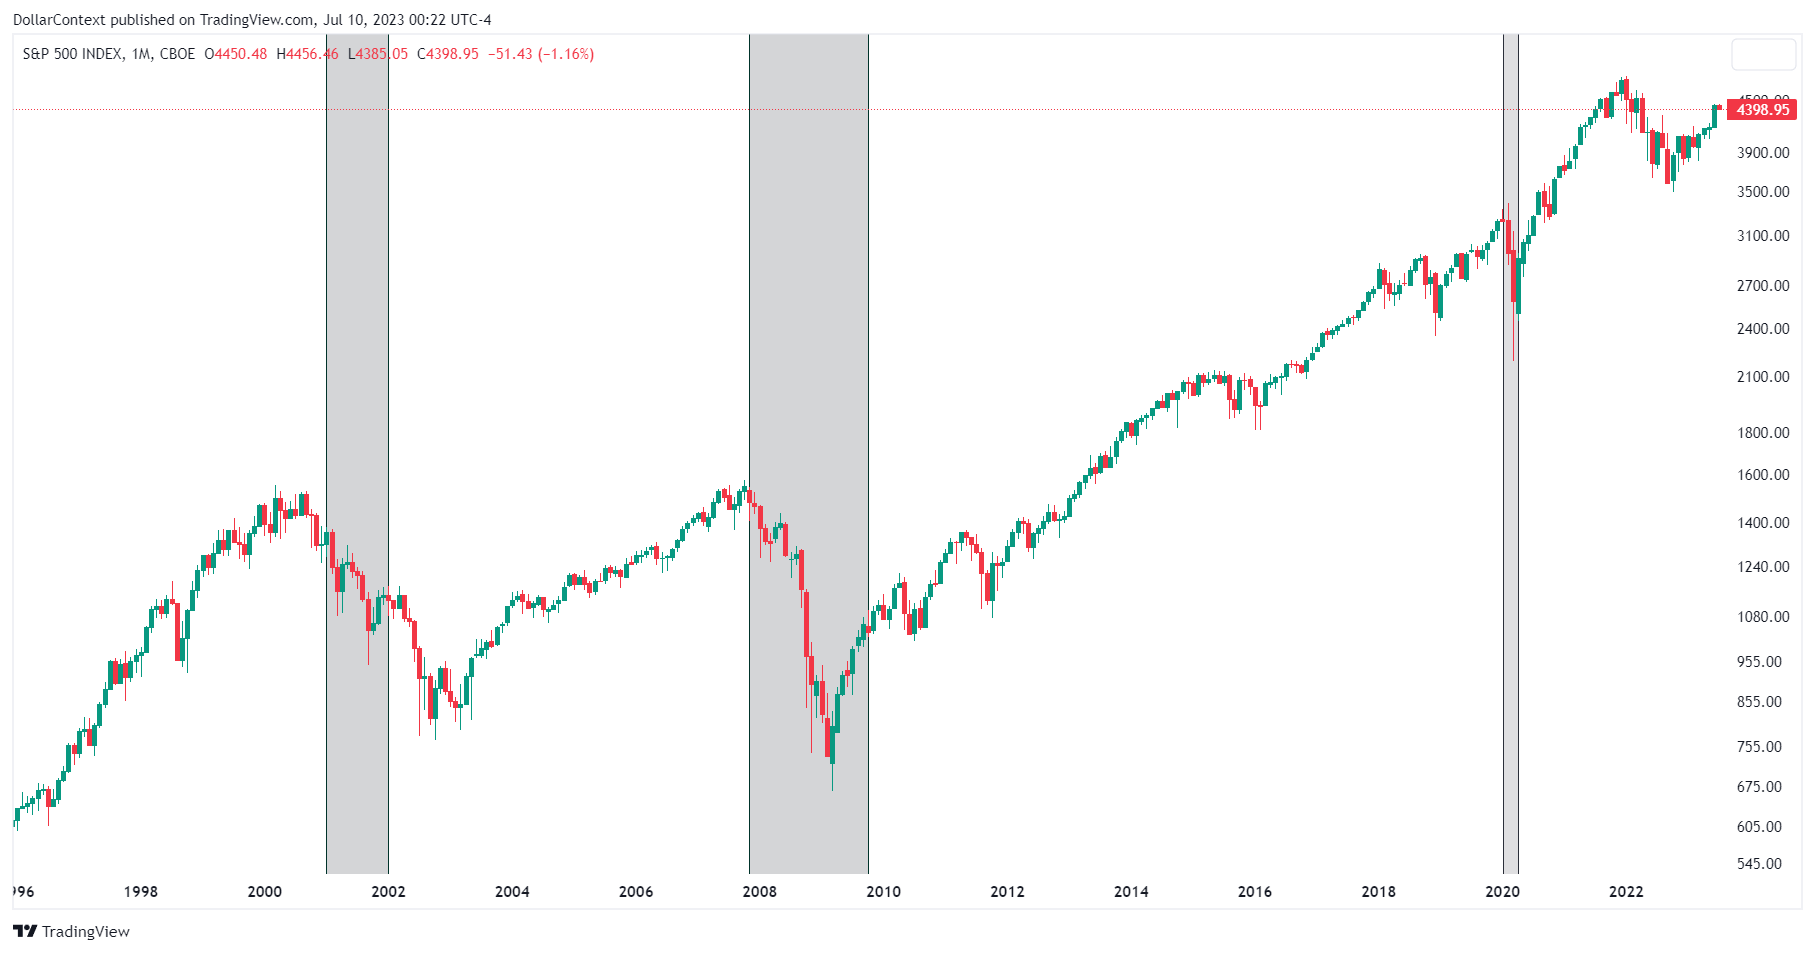 Performance of the S&P 500 during recessions